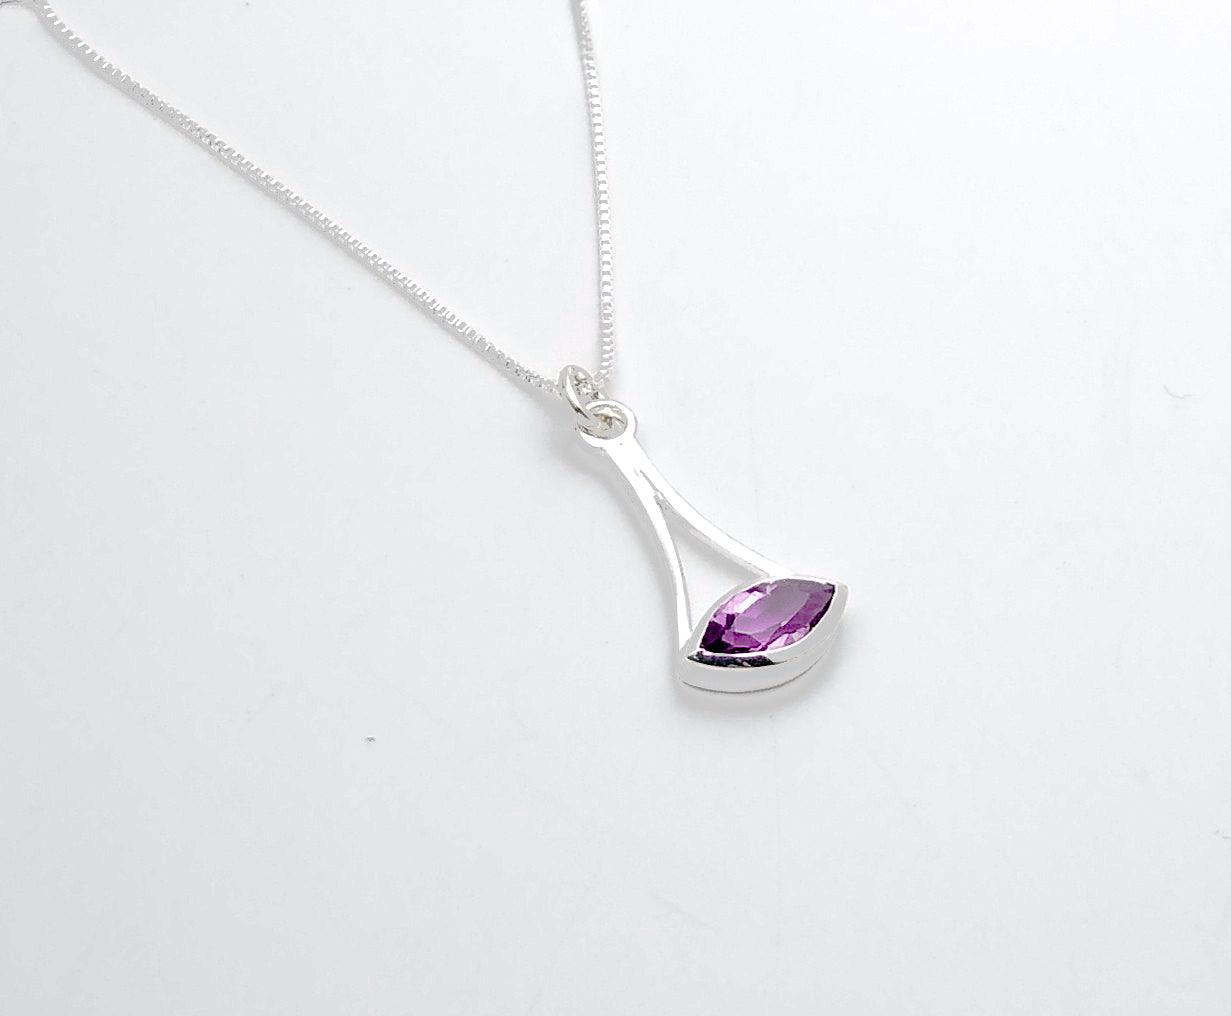 Sterling silver geometric pendant with an amethyst stone at the bottom with a cut-out in the middle. 18-inch chain